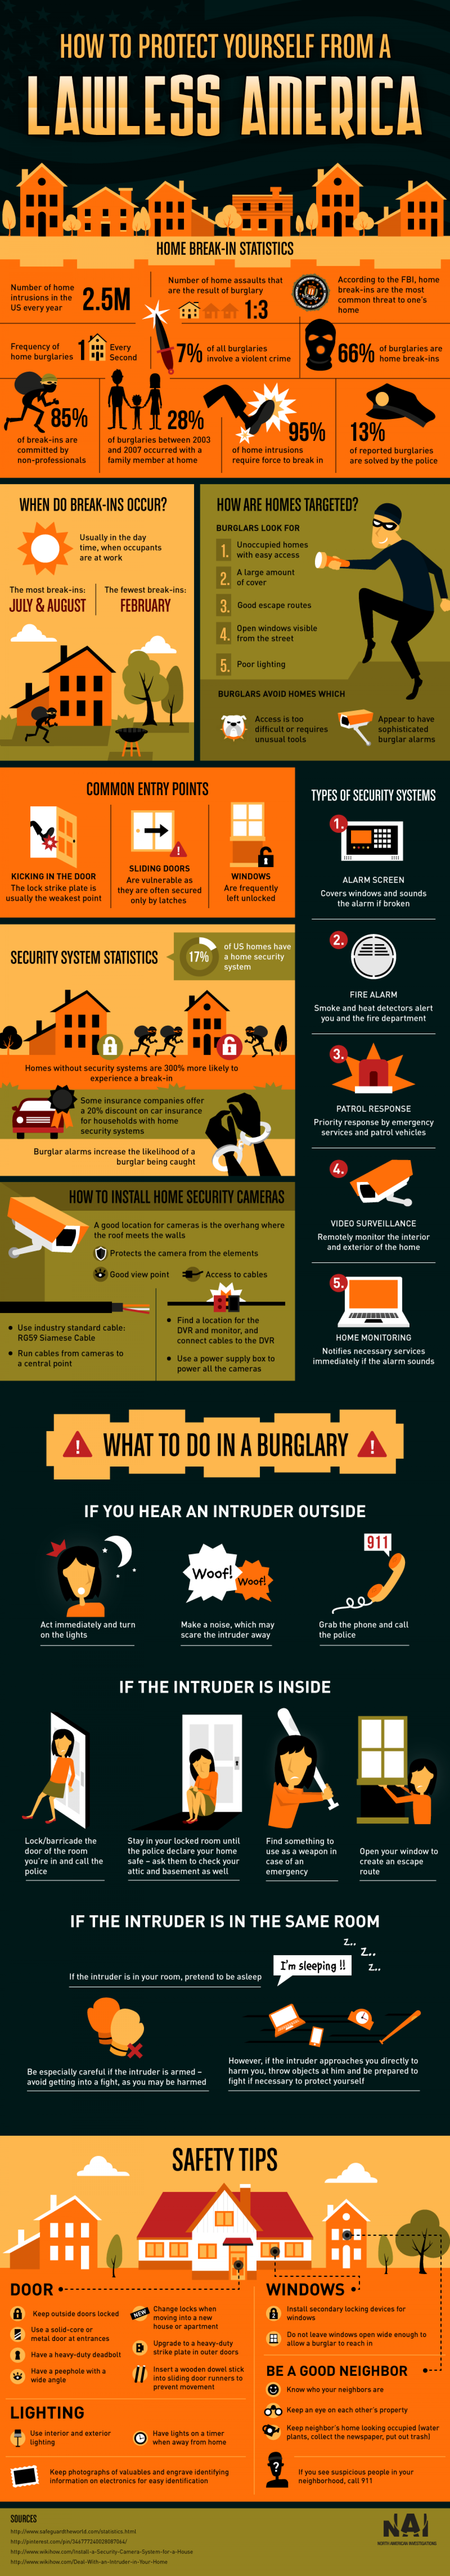 How To Protect Yourself From A Lawless America Infographic